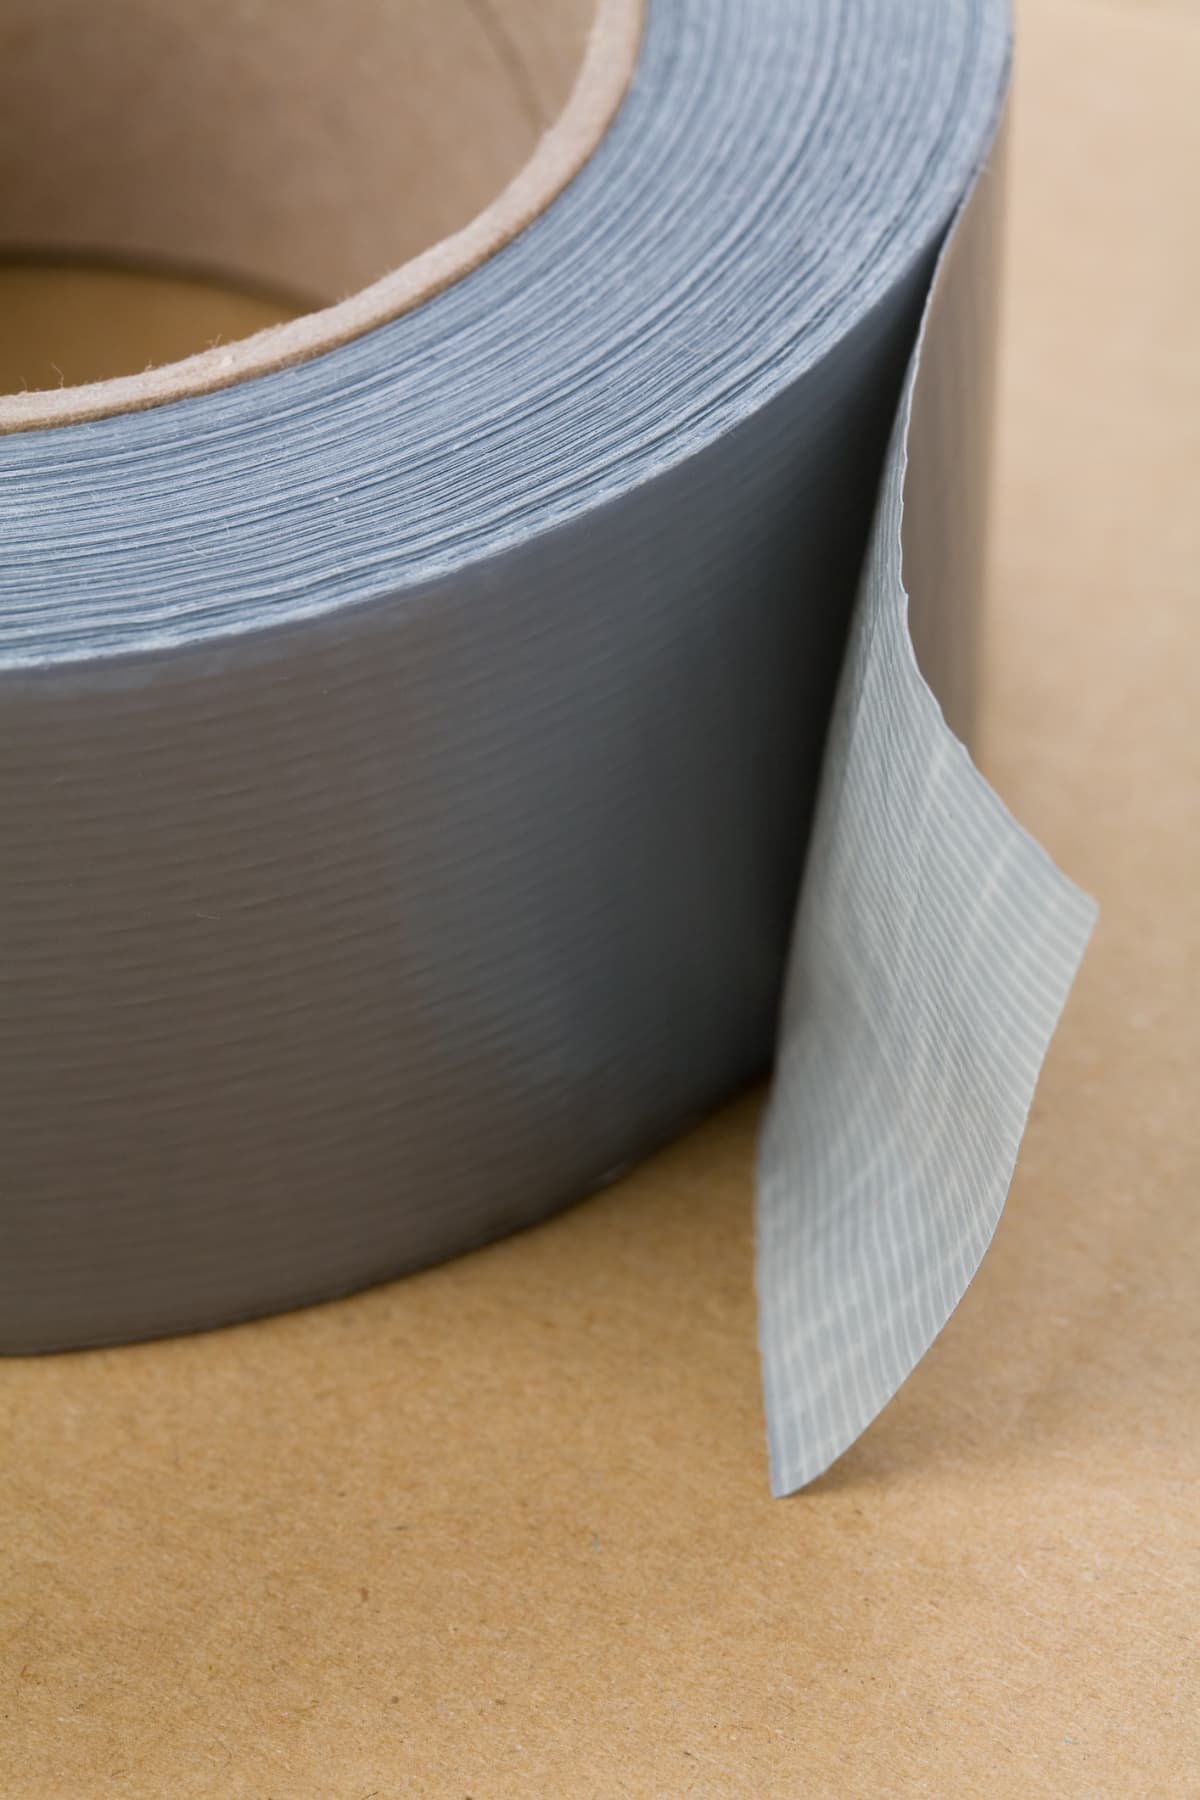 Roll of gray duct tape